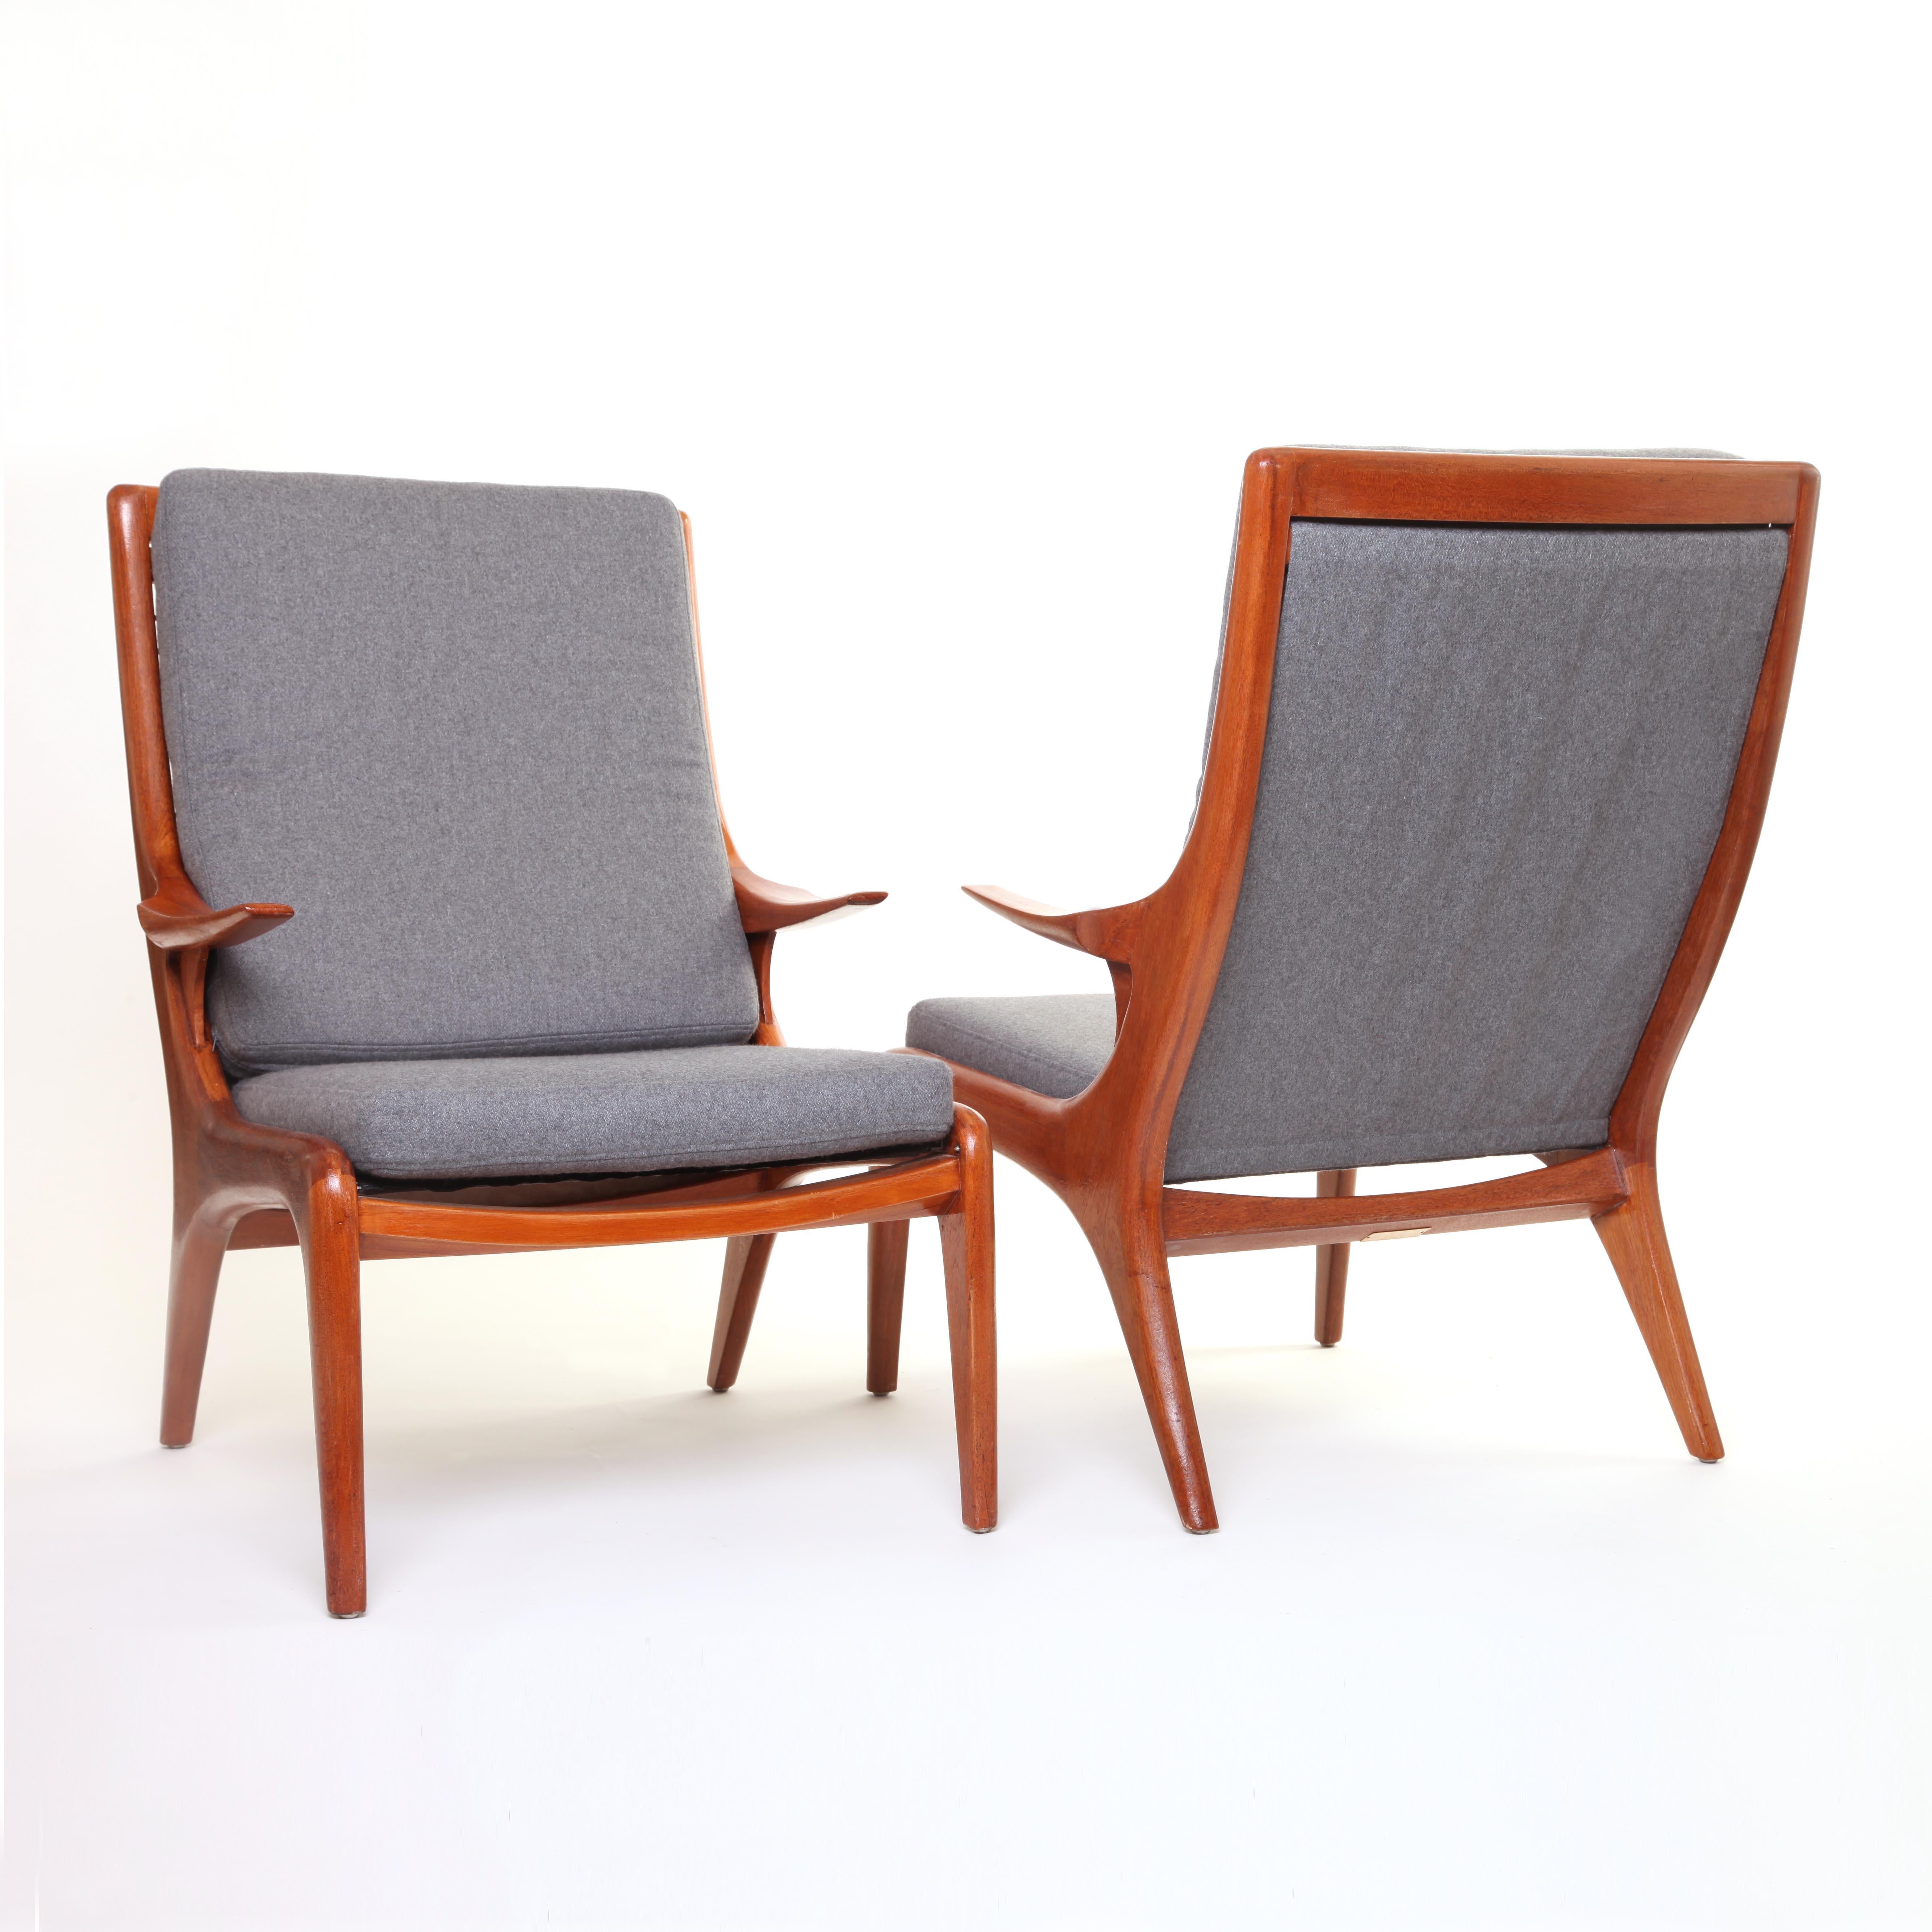 American Mid-Century Modern Sculptural Walnut Lounge Armchairs in the Style of Kagan For Sale